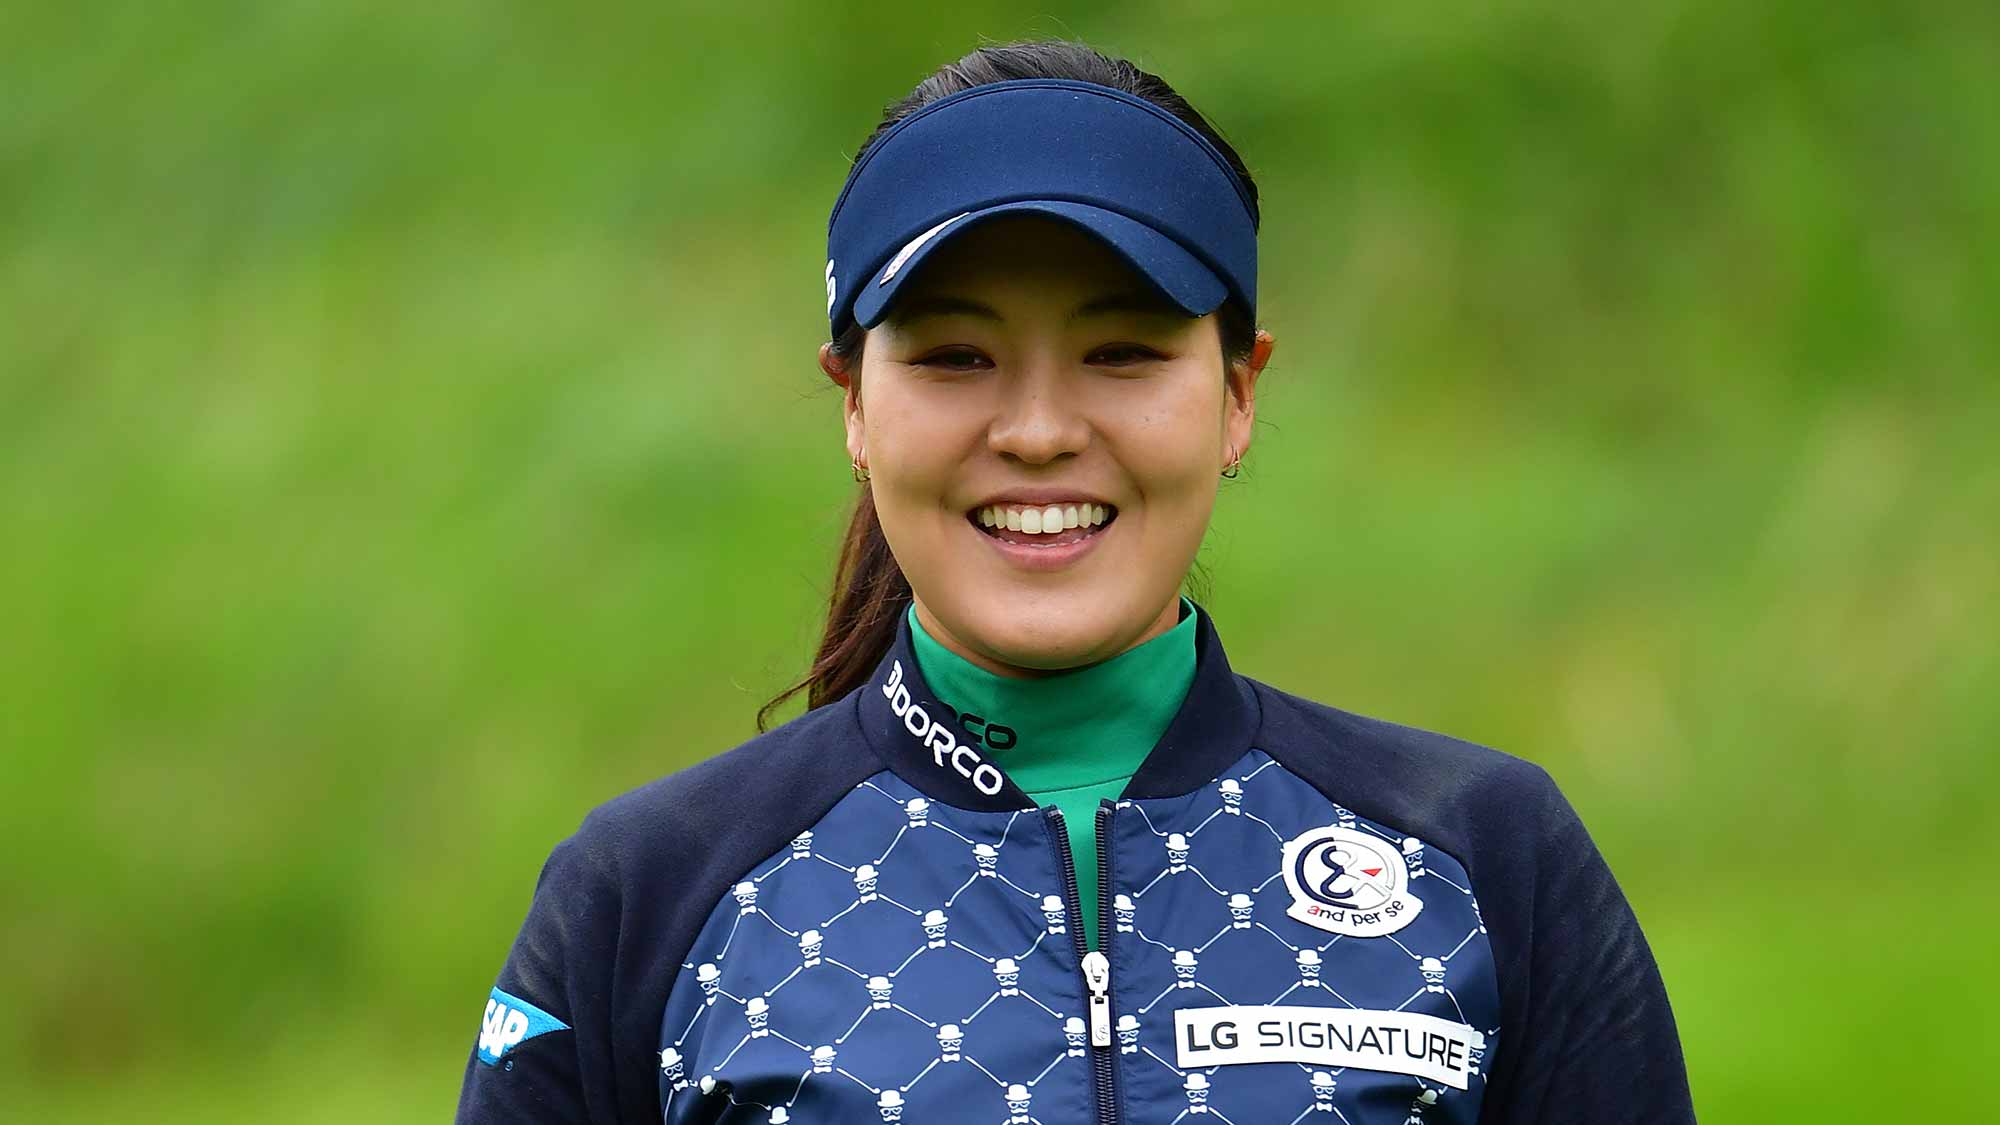 Defending Champion In Gee Chun of South Korea waves during the pro-am prior to the start of the Evian Championship at Evian Resort Golf Club